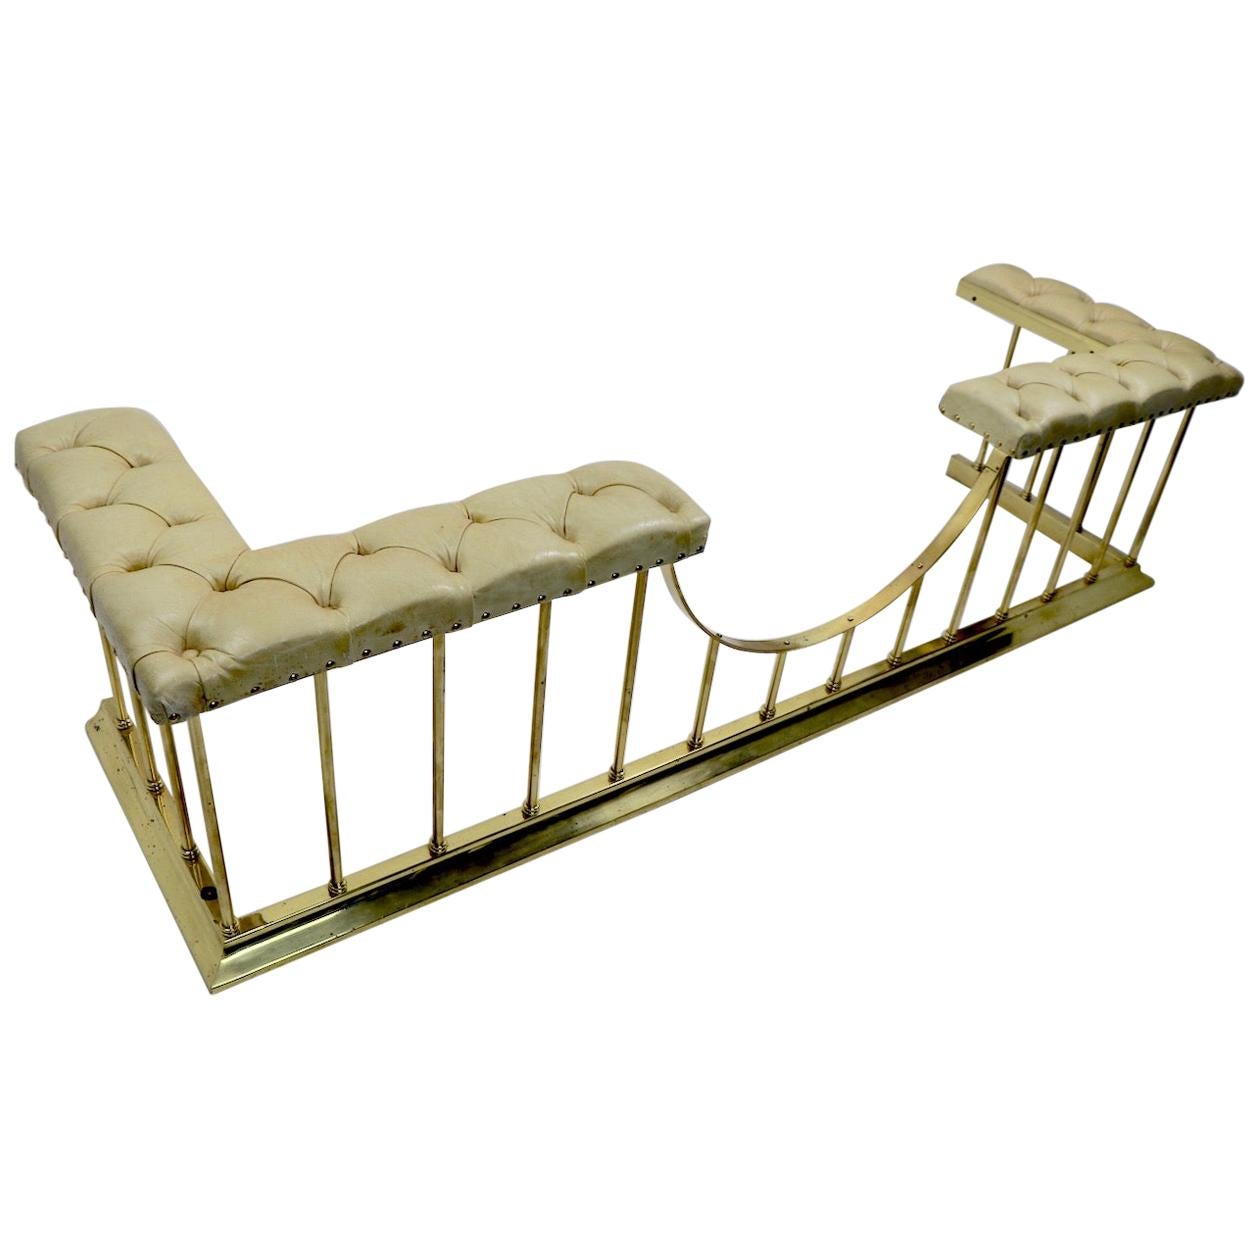 Large Scale Bench Club Fender in Brass and Leather